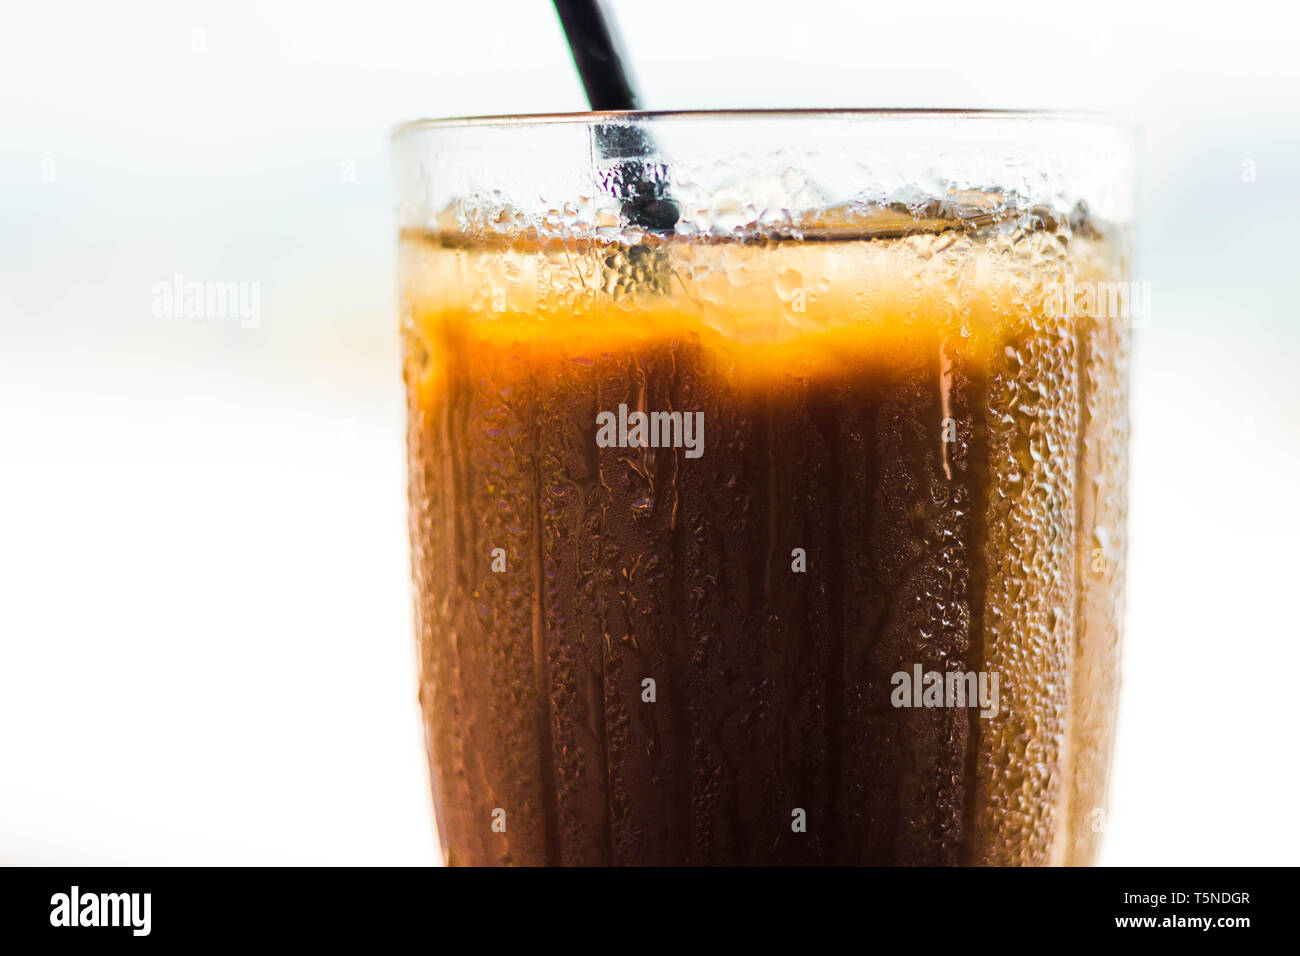 Iced coffee or cafe latte in a cup on white background Stock Photo